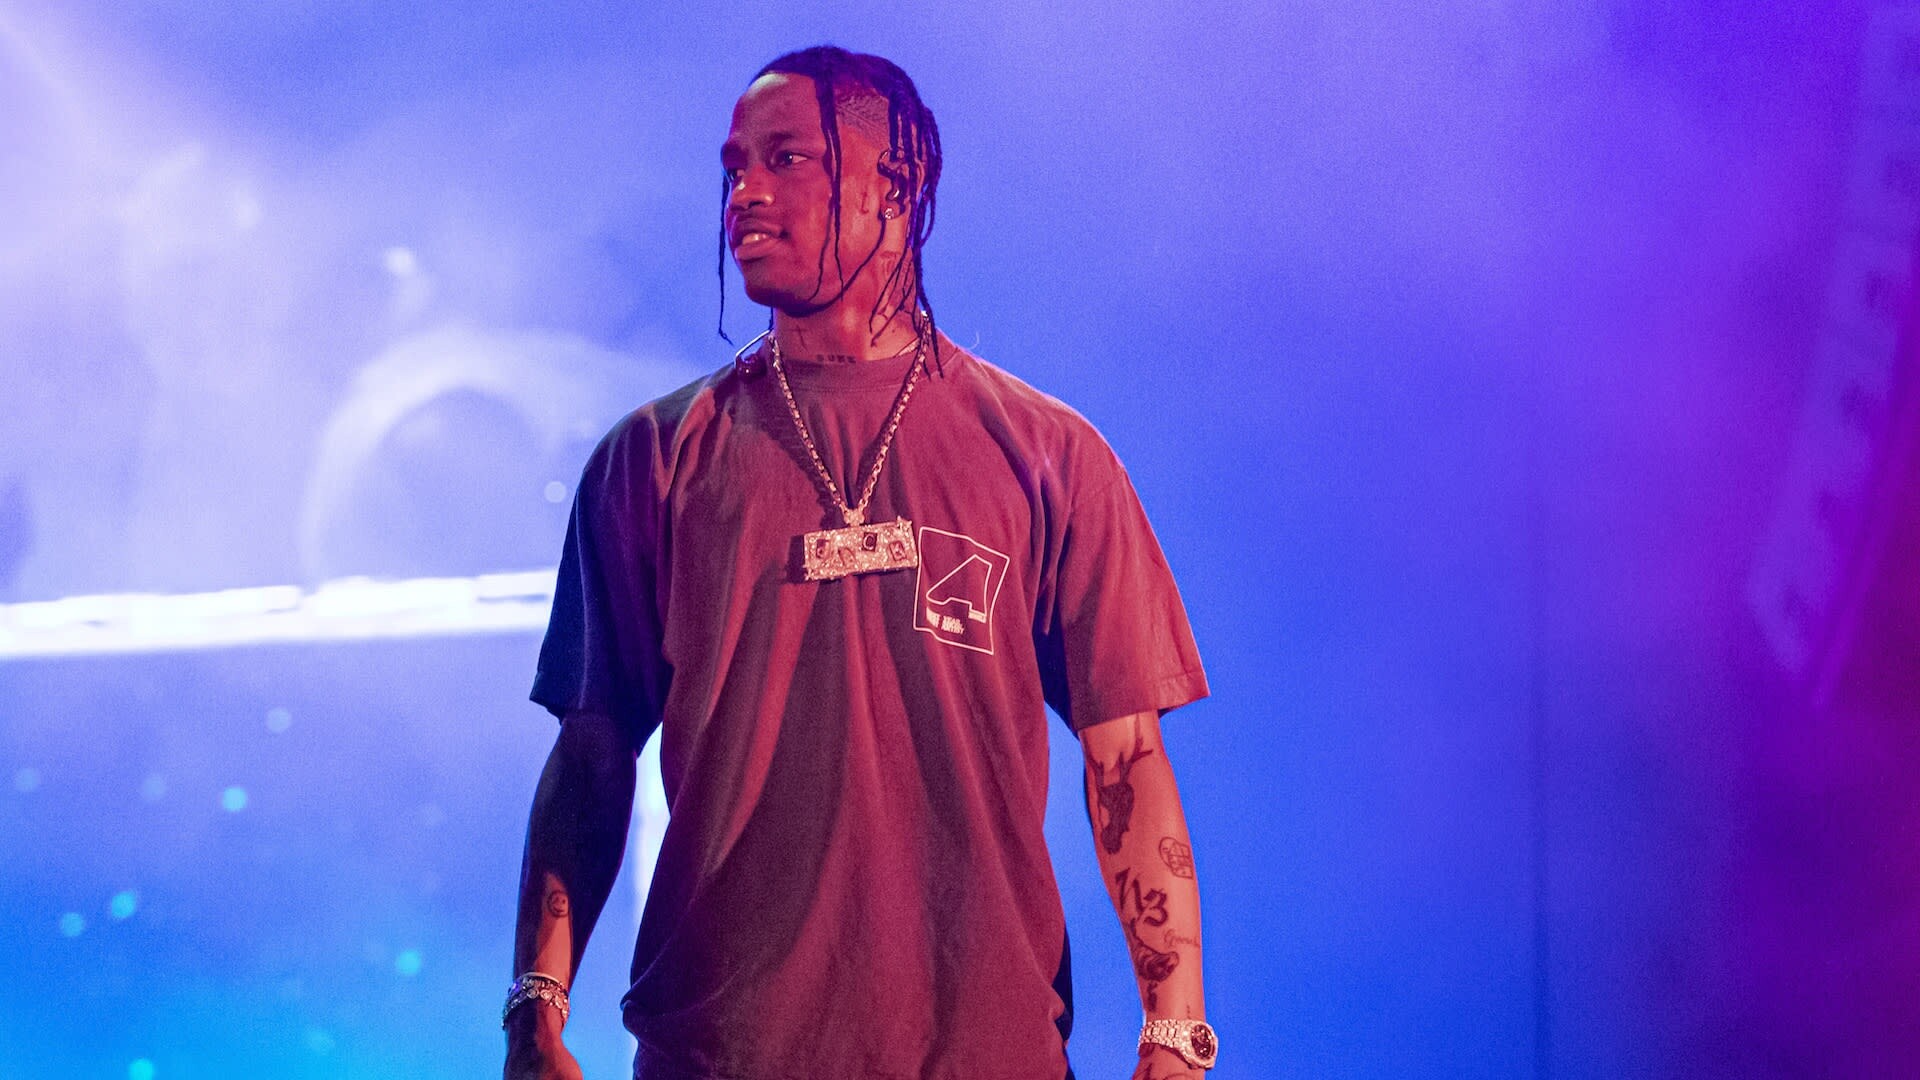 Travis Scott: One of the highest-paid rappers, Birds in the Trap Sing McKnight. 1920x1080 Full HD Background.